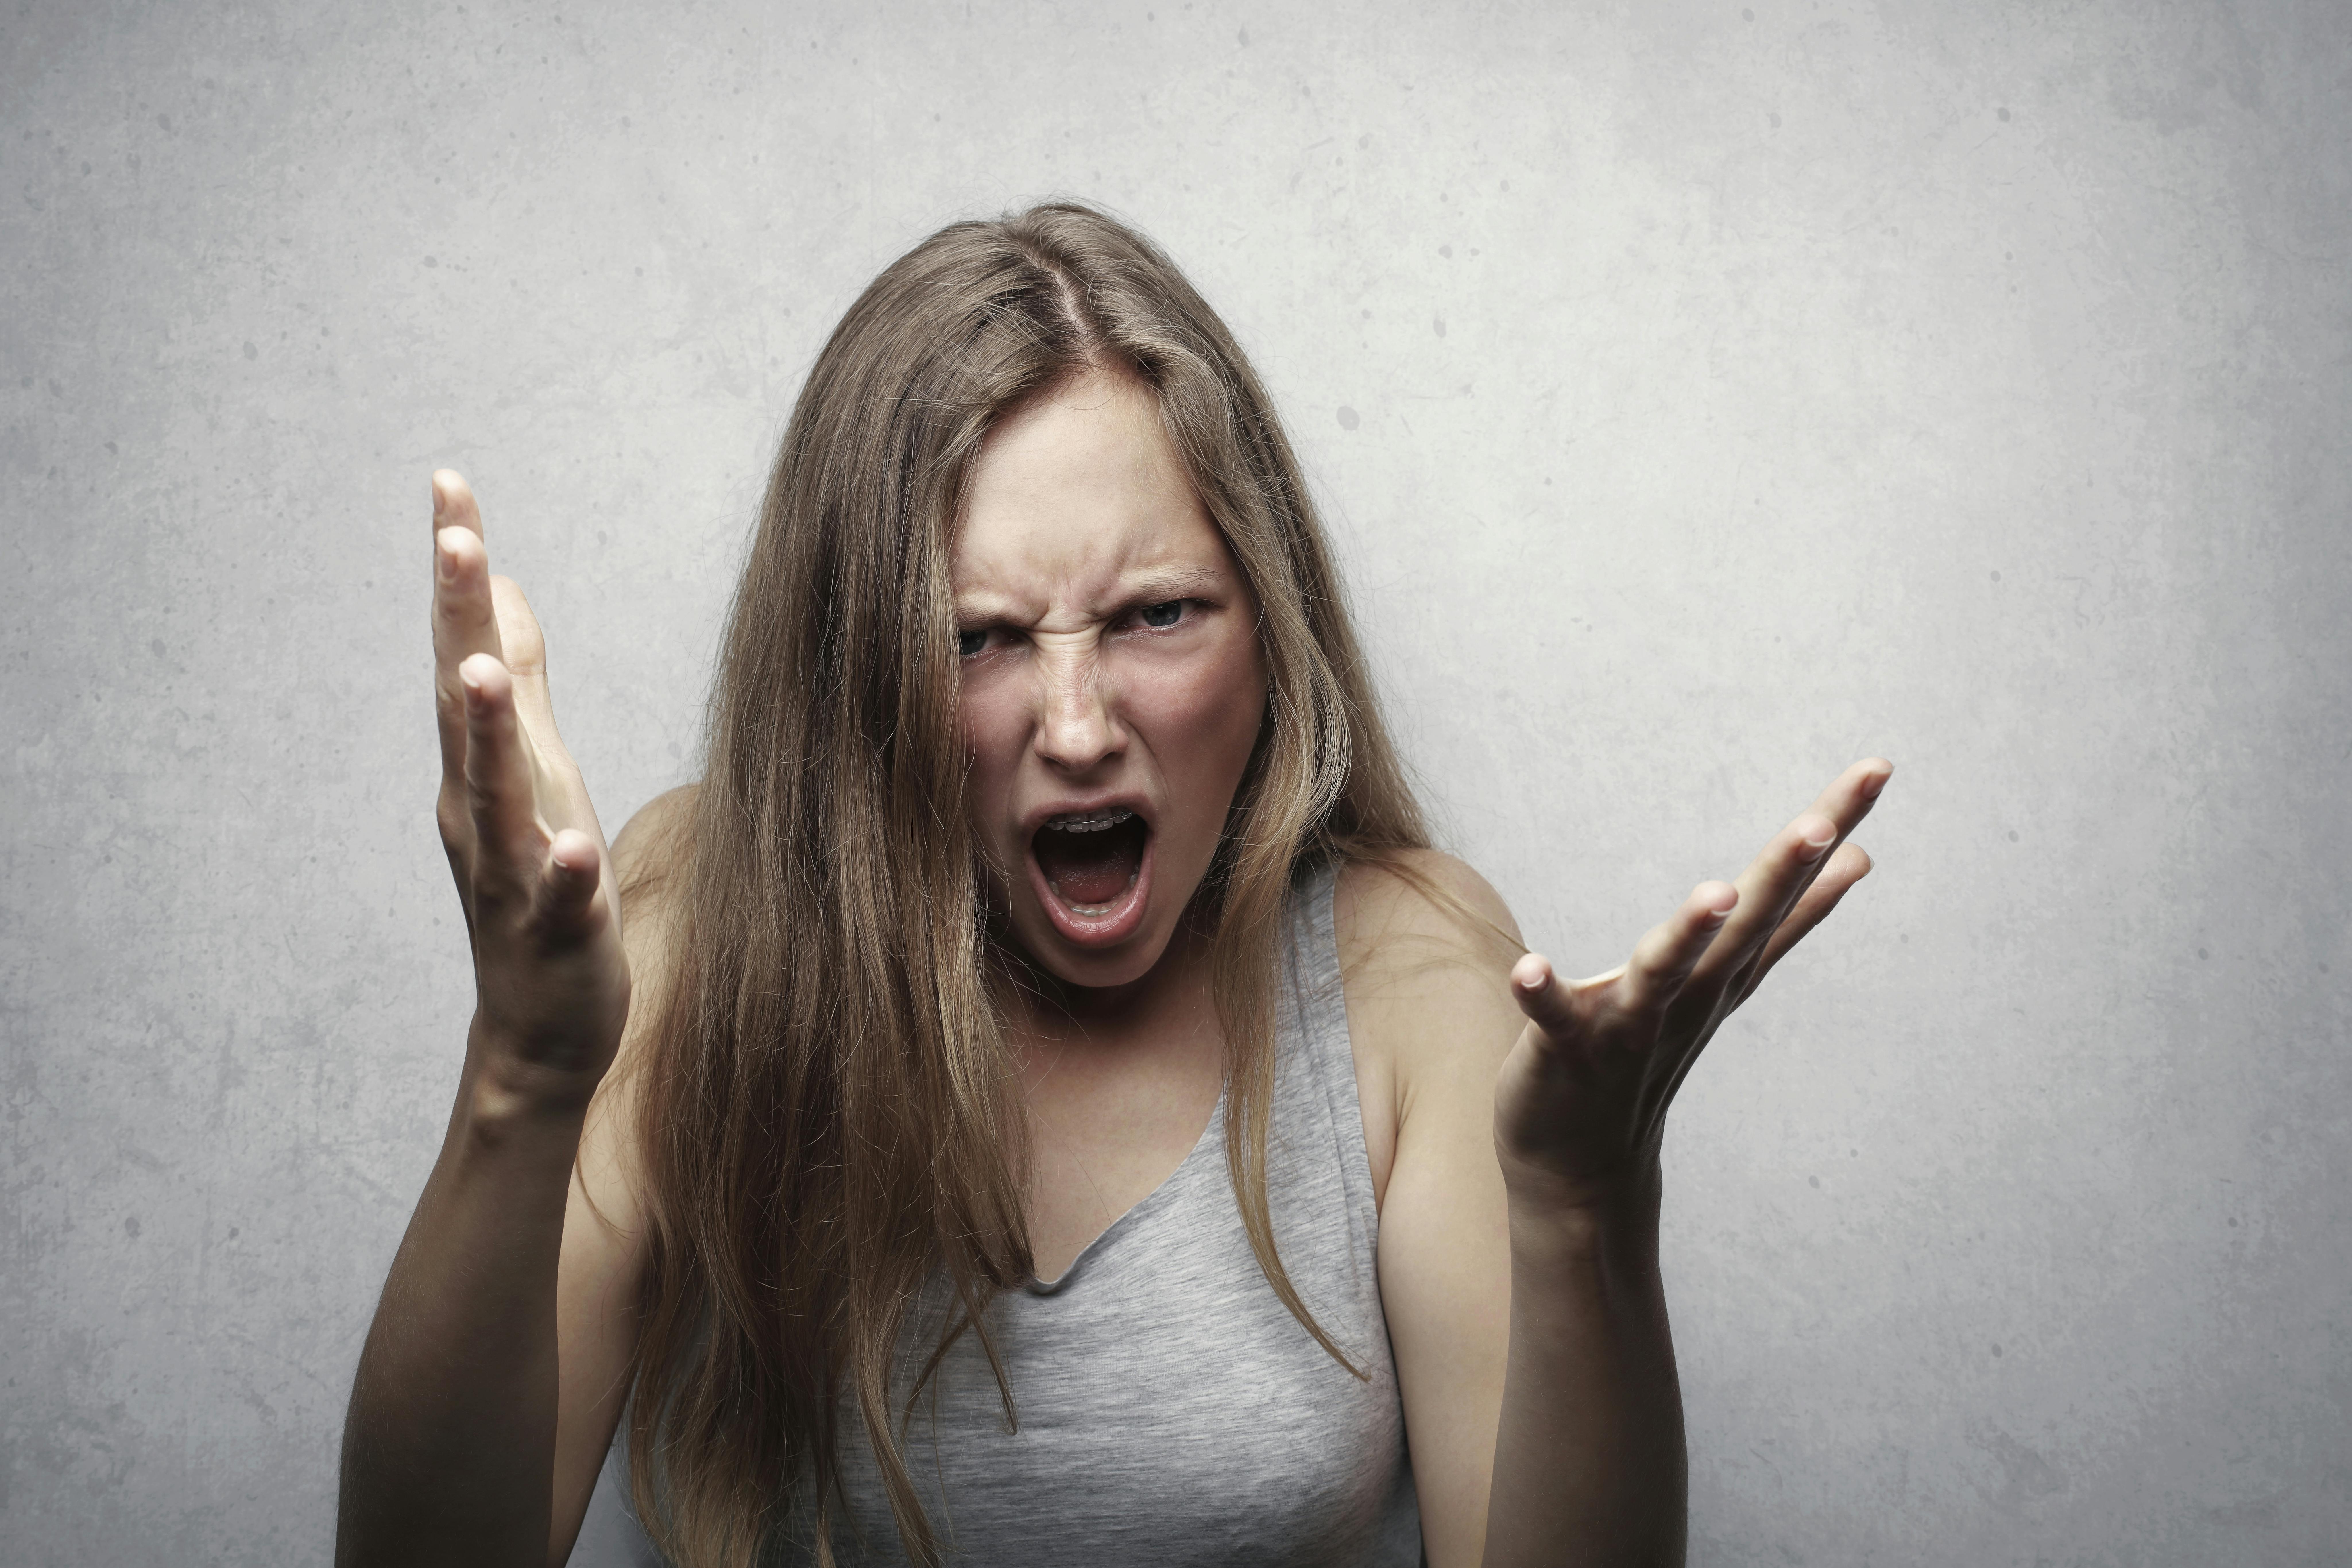 An angry woman wearing gray tank top. | Photo: Pexels